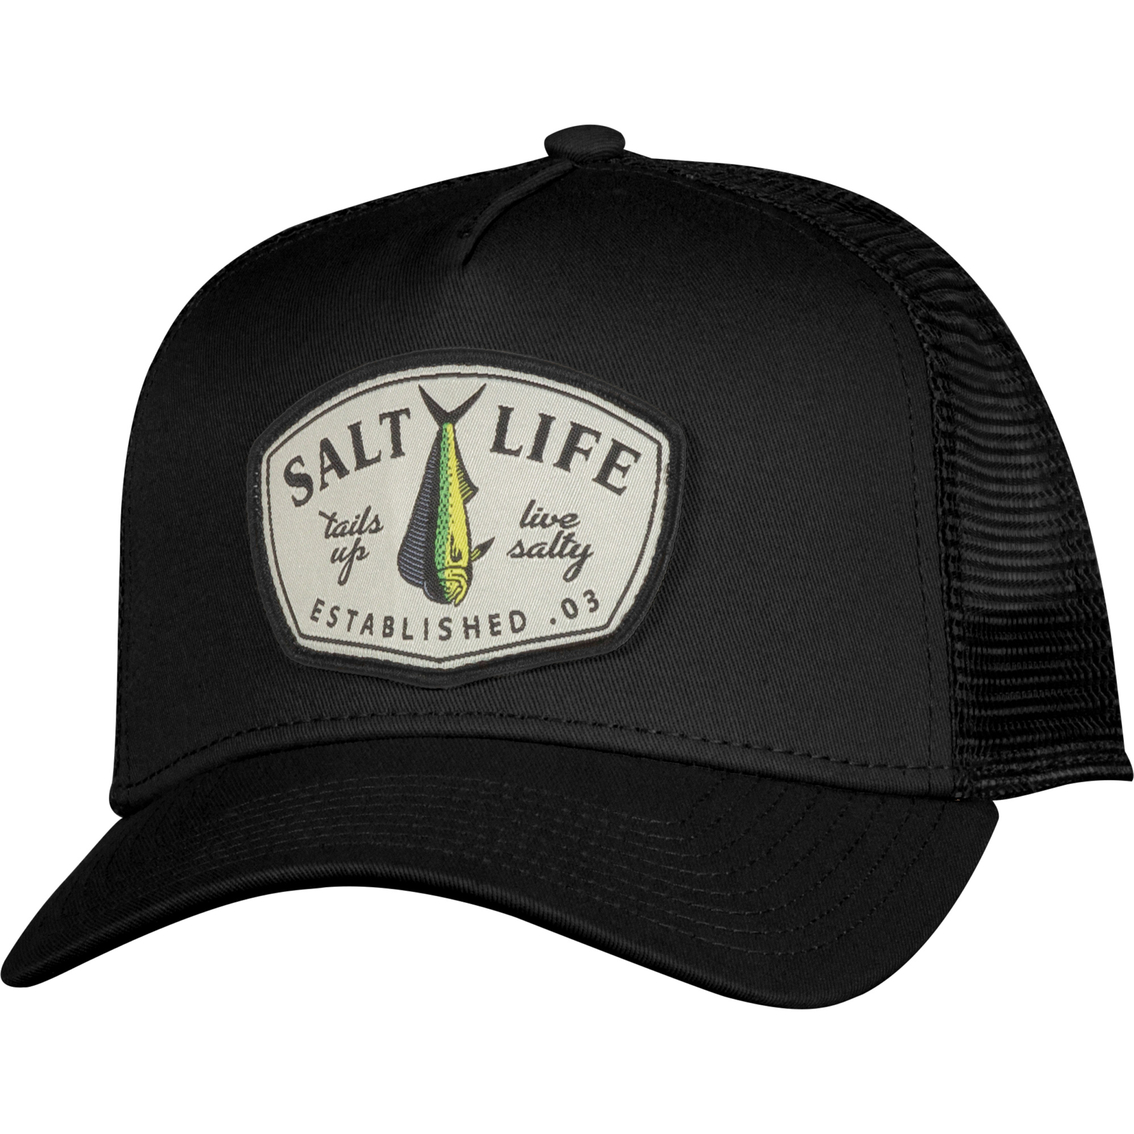 Salt Life Tails Up Mesh Hat, Hats & Visors, Clothing & Accessories